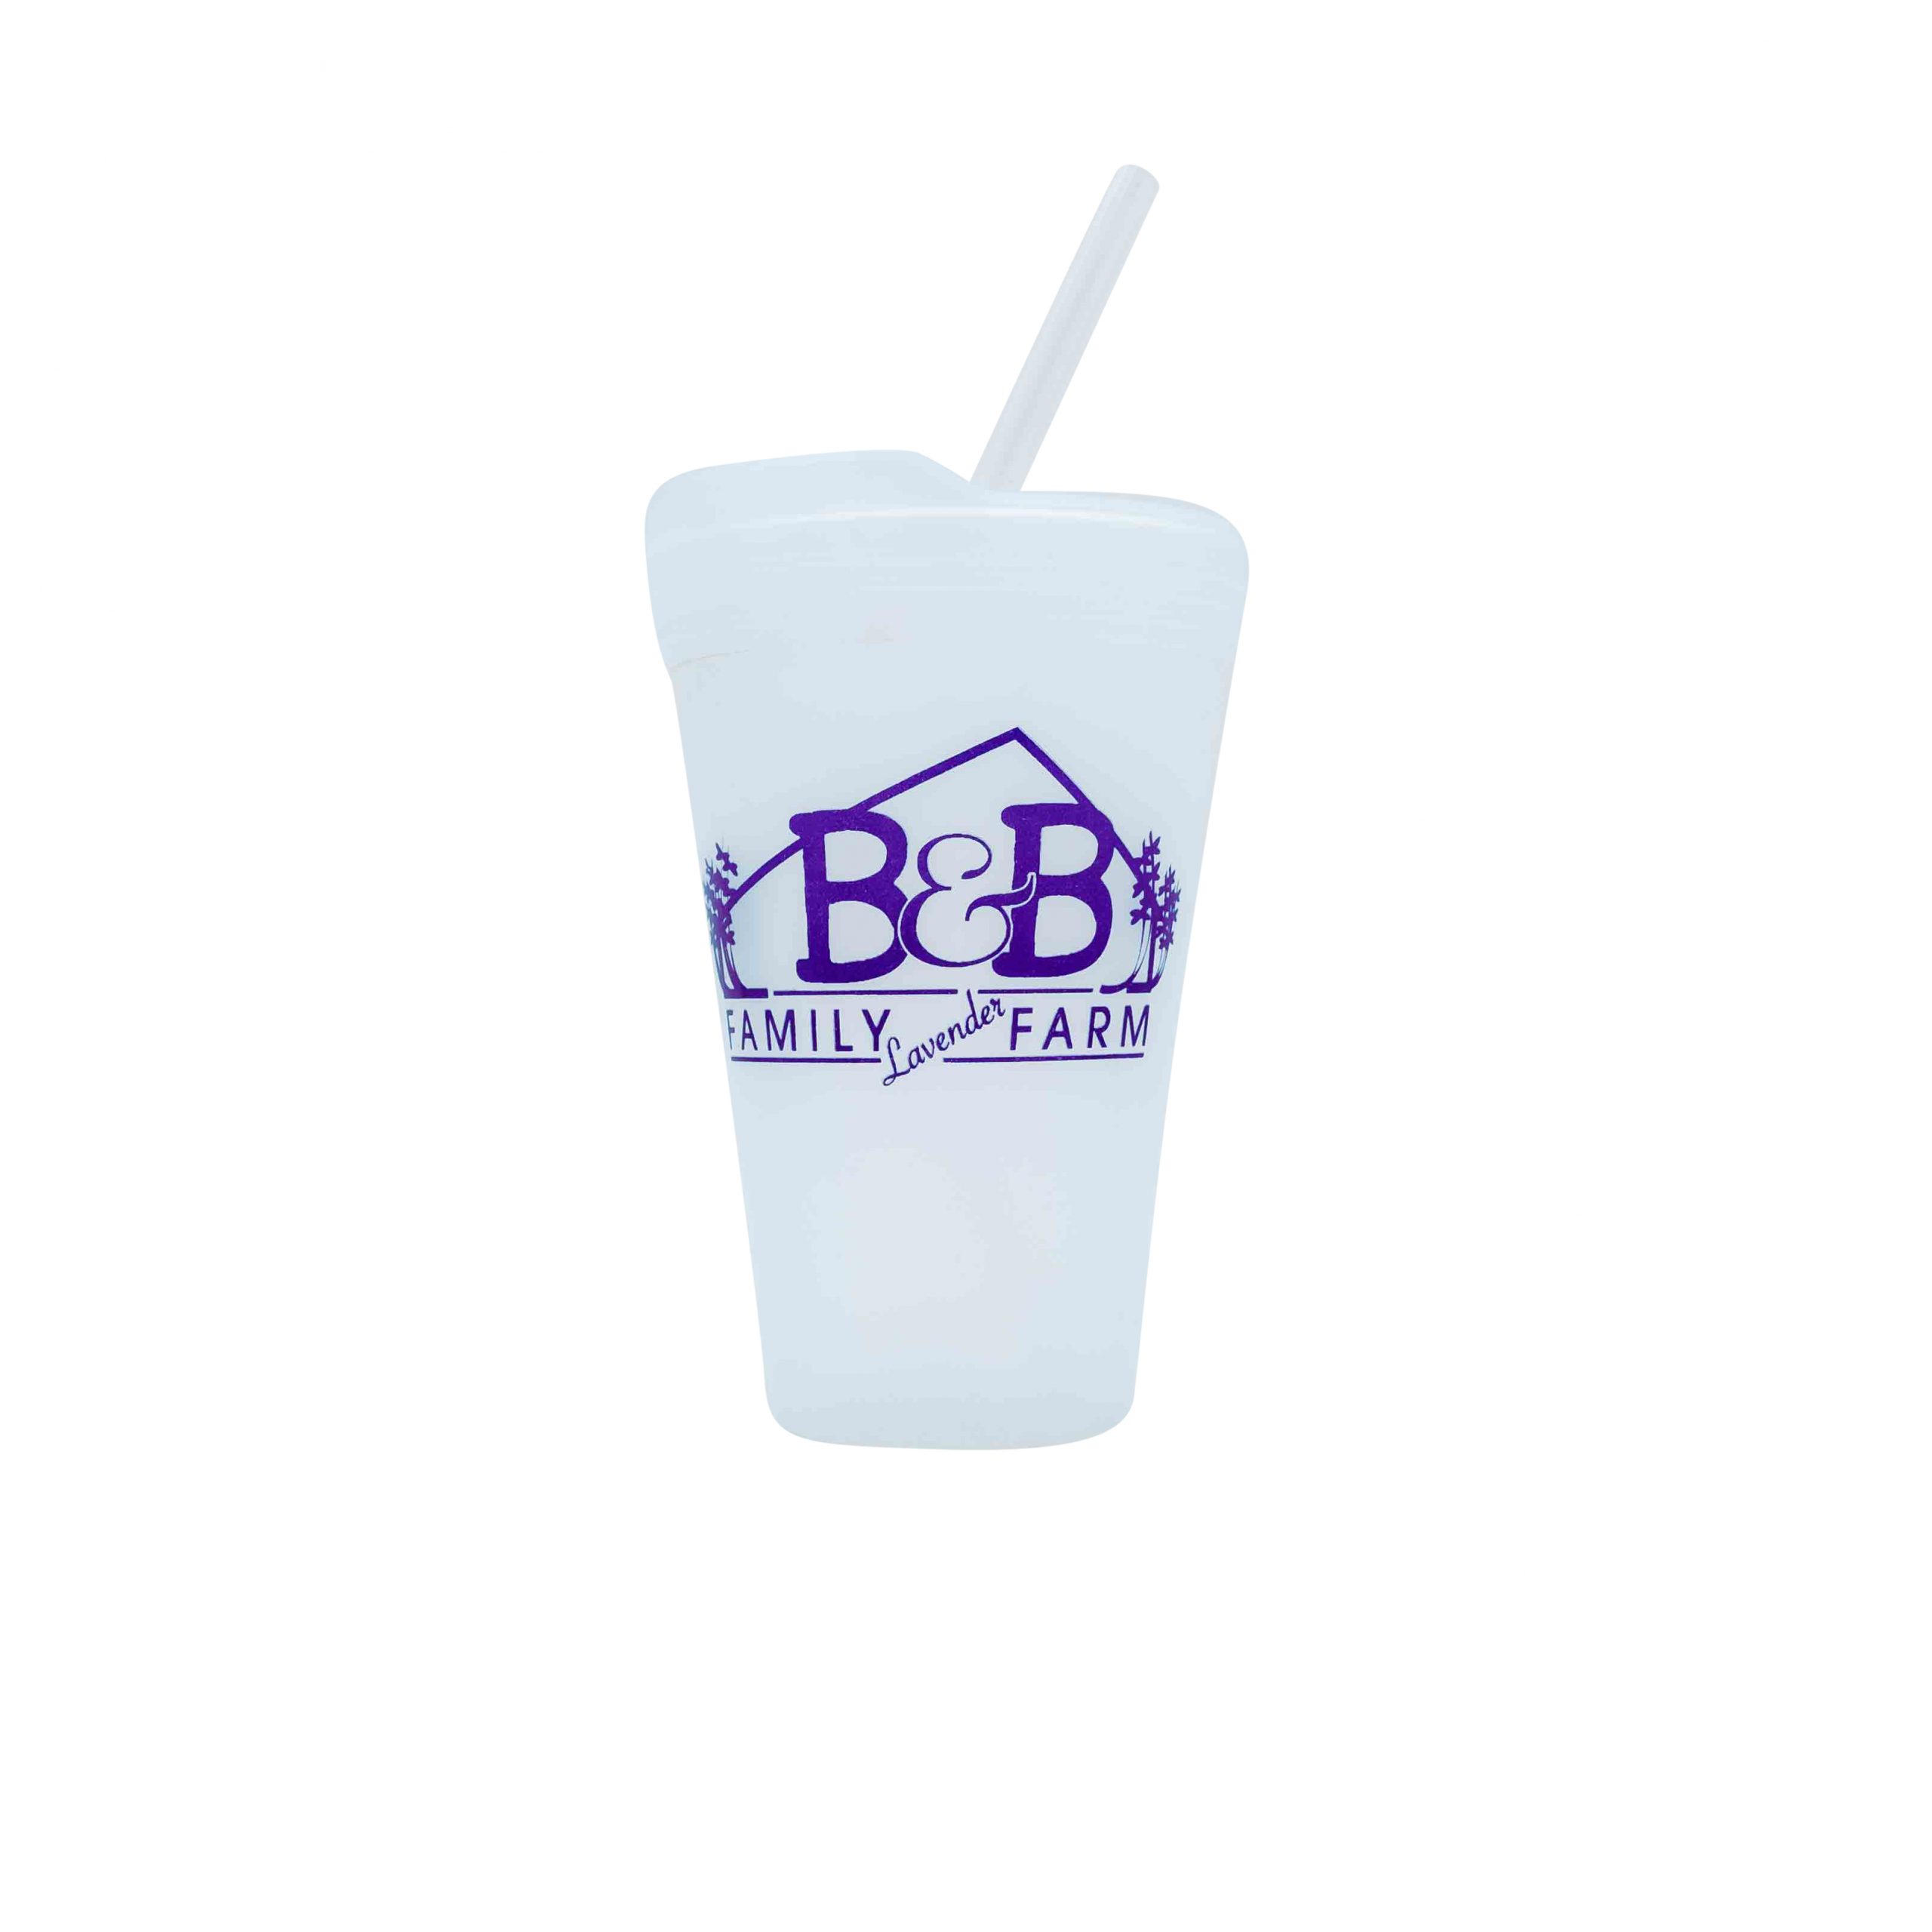 B&B Family Farm Sili Pint Cup with lid and straw